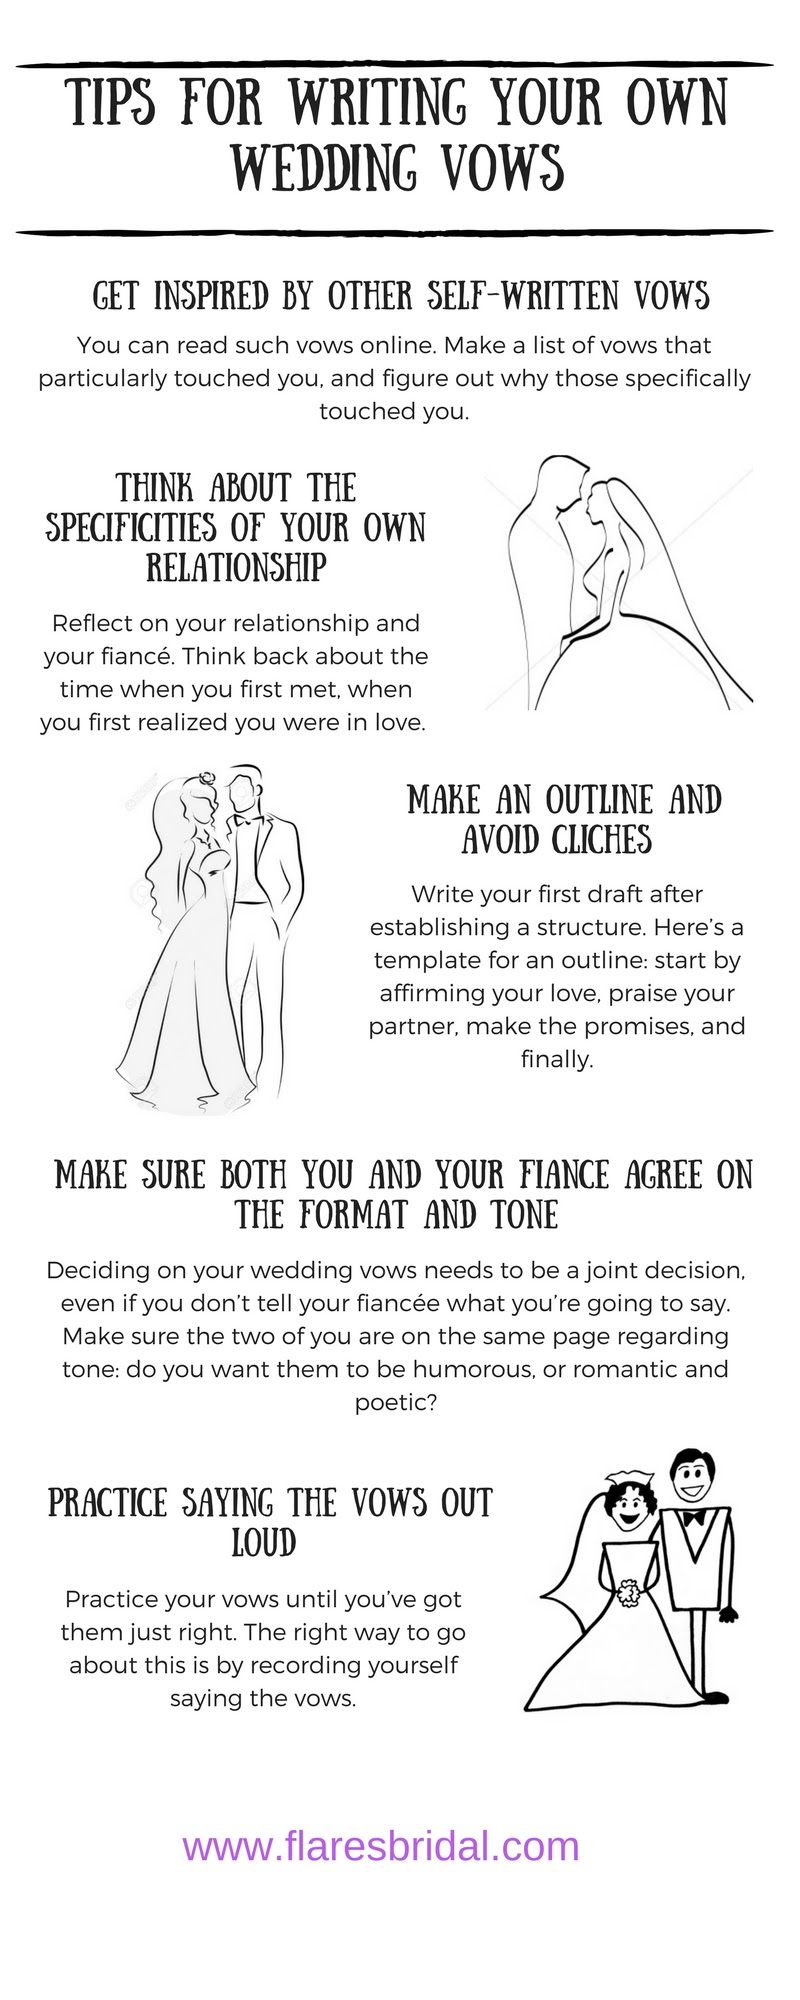 Wedding Vows: Can You Write Your Own Wedding Vows